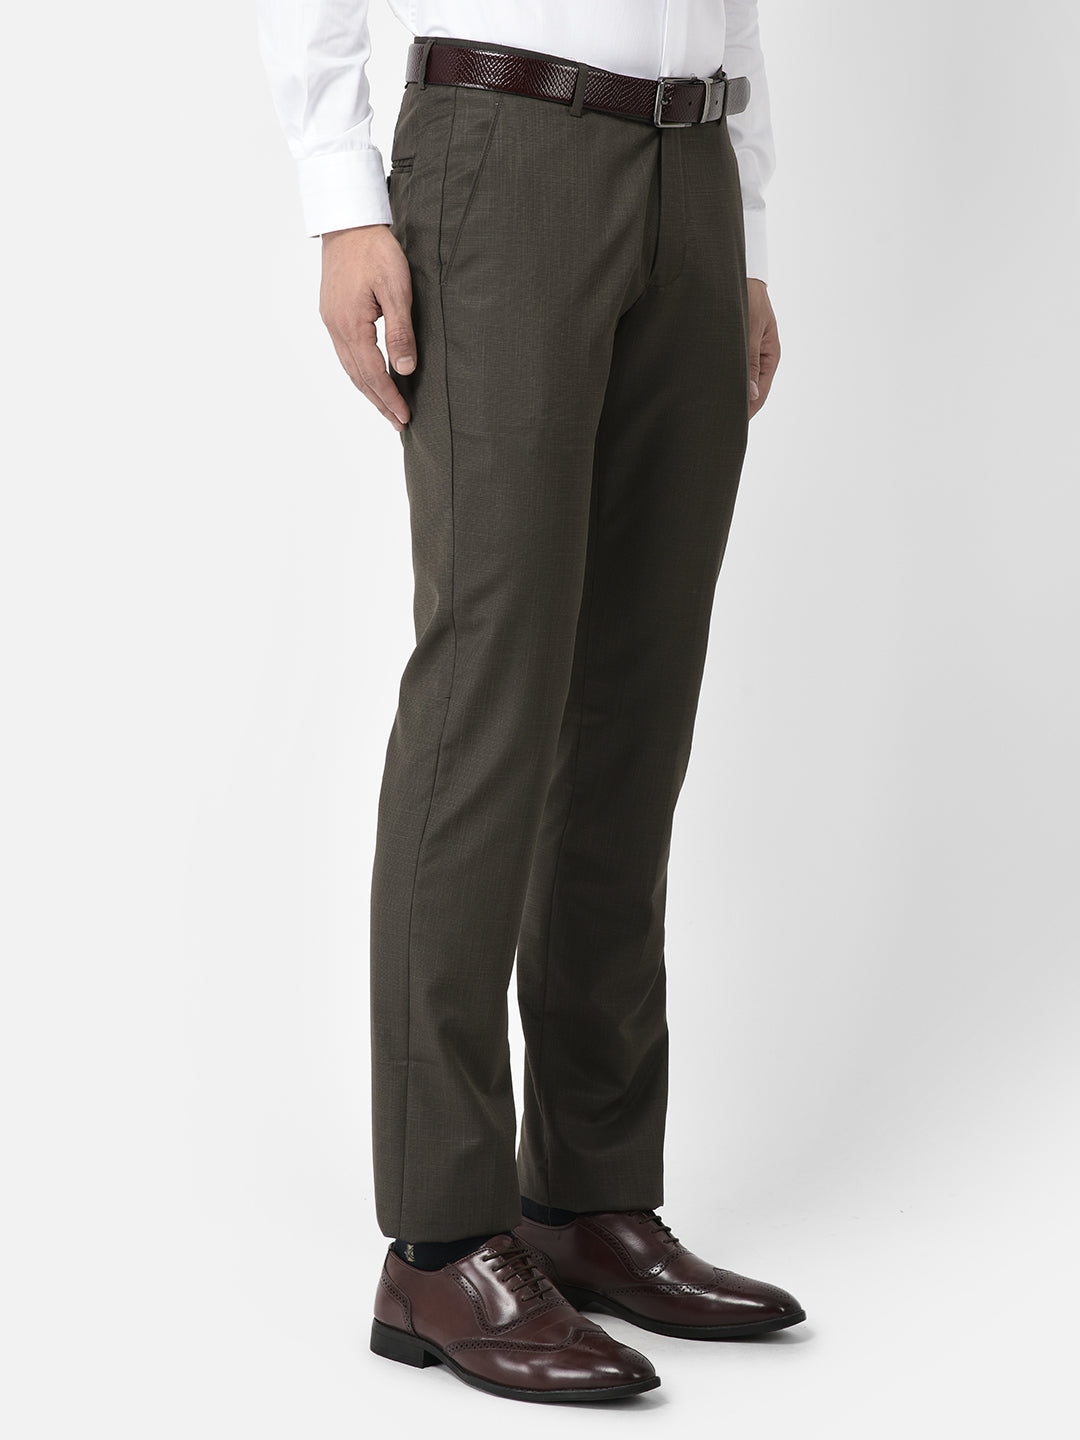 Cobb Brown Ultra Fit Formal Trouser - Premium Quality and Comfortable